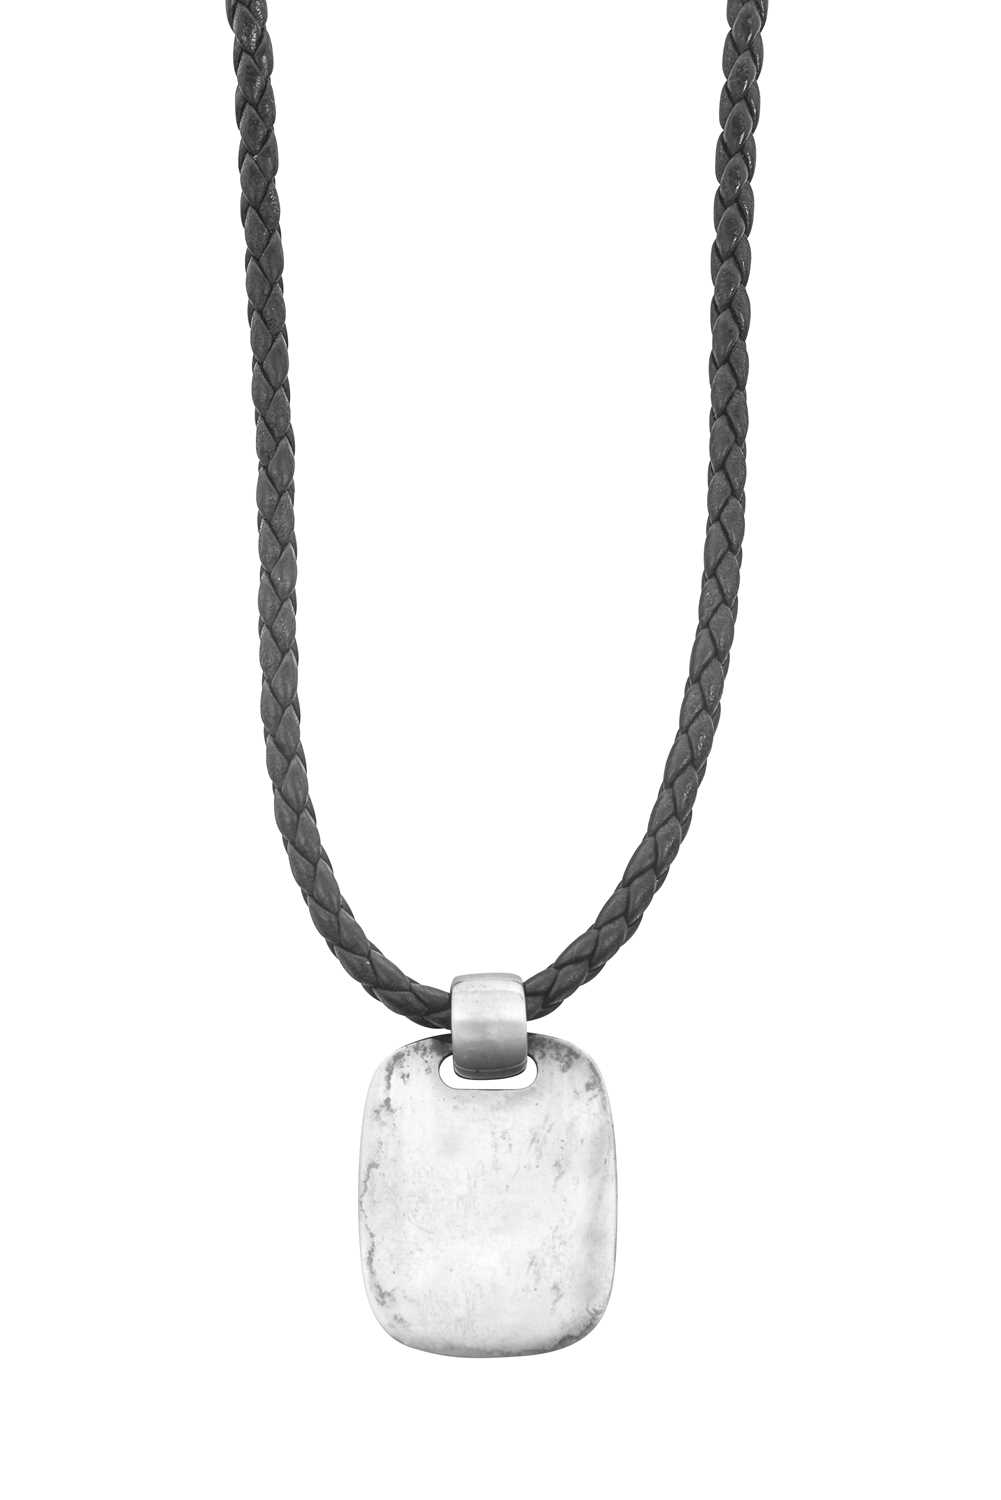 A Pendant on Chain and Two Pairs of Earrings, by Georg Jensen the pendant formed of a rectangular